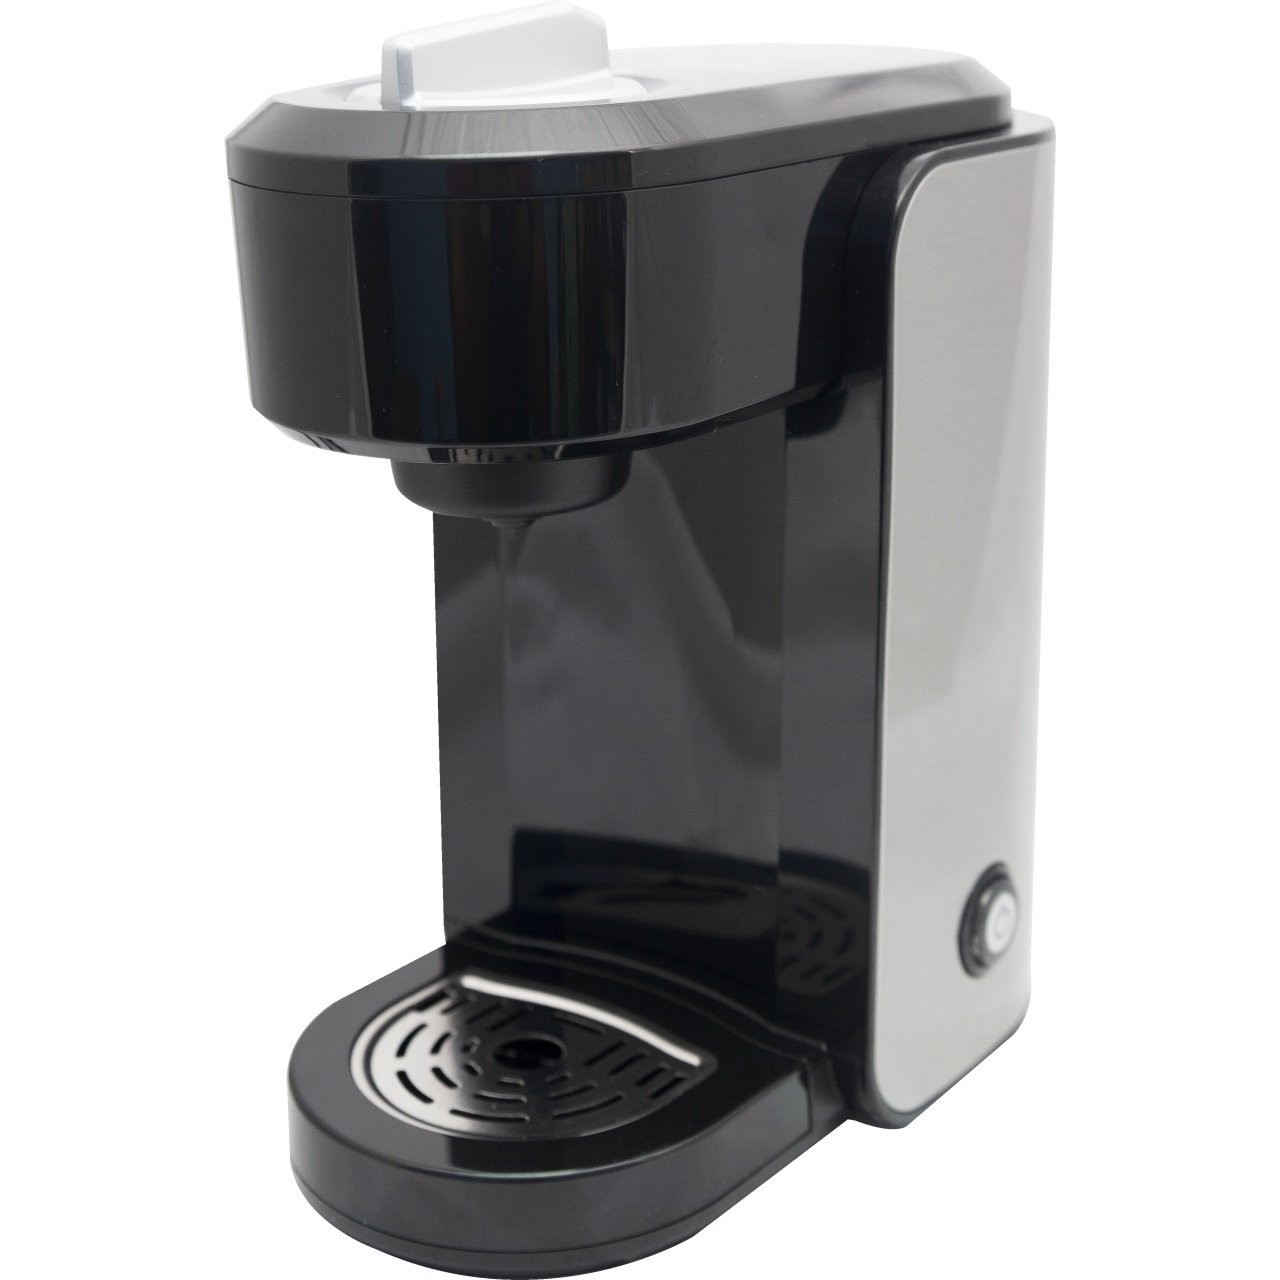 CAFE BLUE COFFEE MAKER 1ct